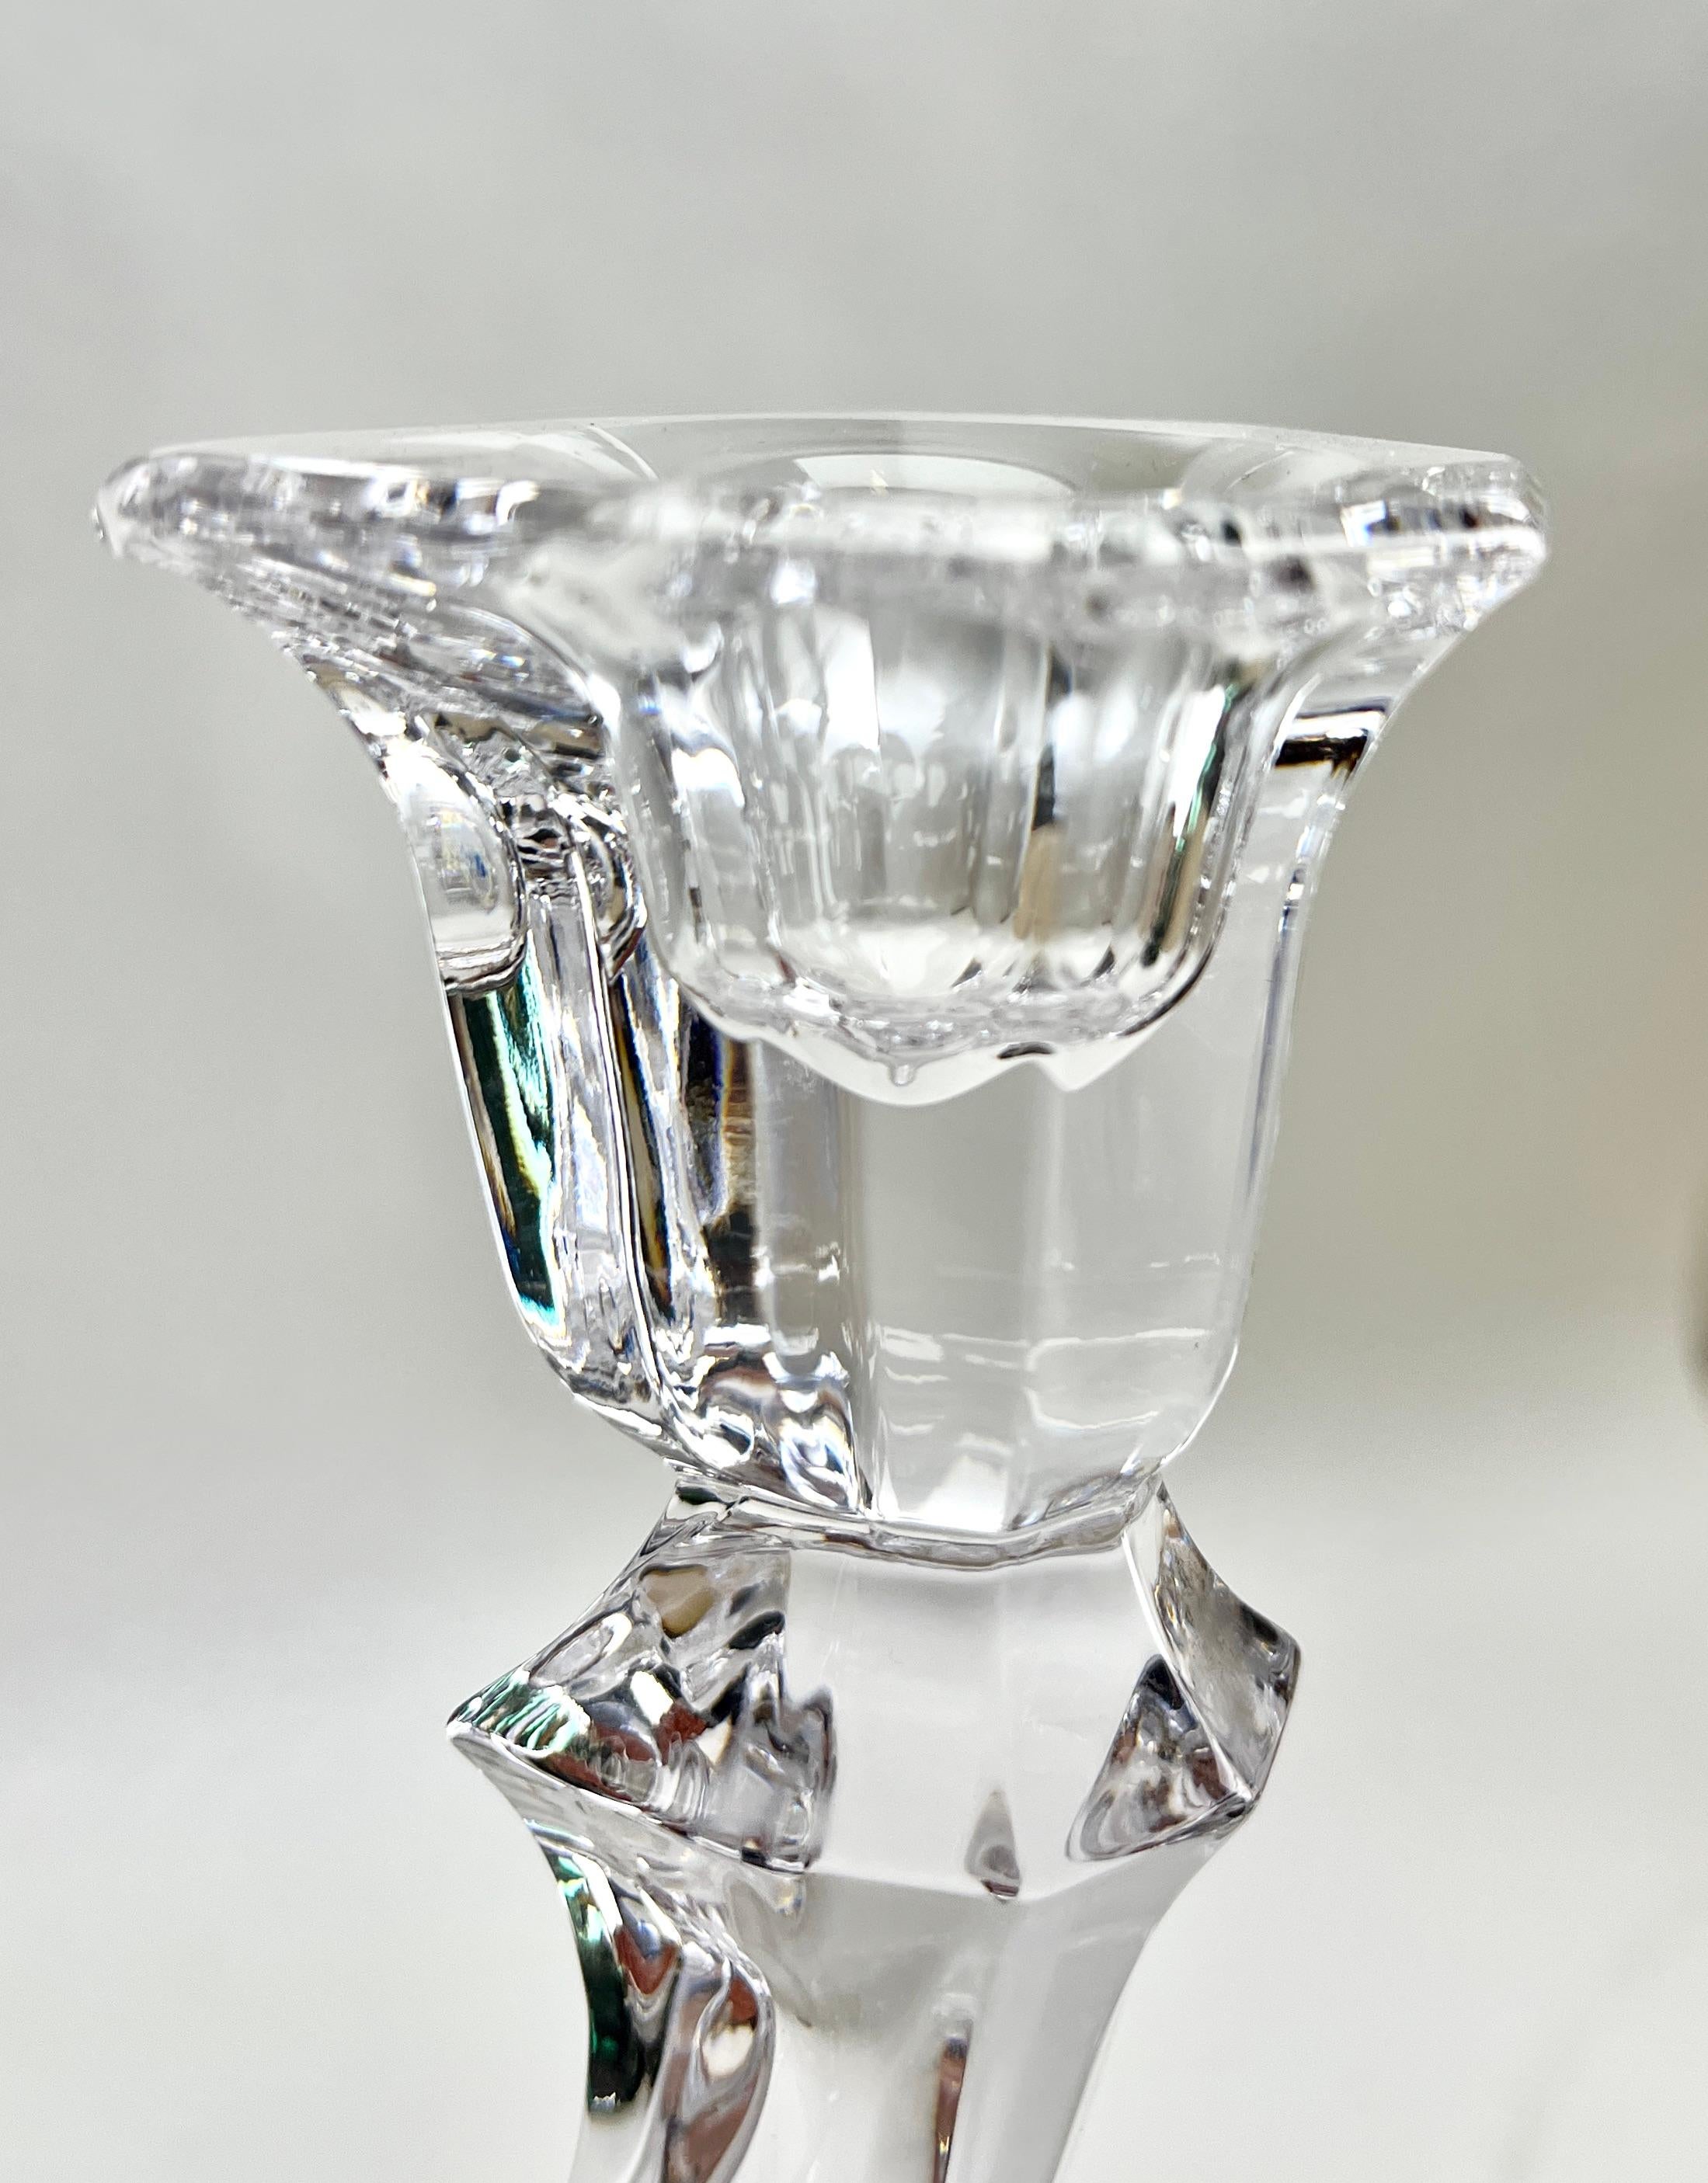 Val Saint Lambert 1935, Belgium
Very nice clear Crystal Art Deco 5 arms.candlestick made by Val Saint-Lambert. 
Crystal Weight 1.9 Kg

Please don't hesitate to get in touch with any further questions.

  With Best Wishes, Geert

  








